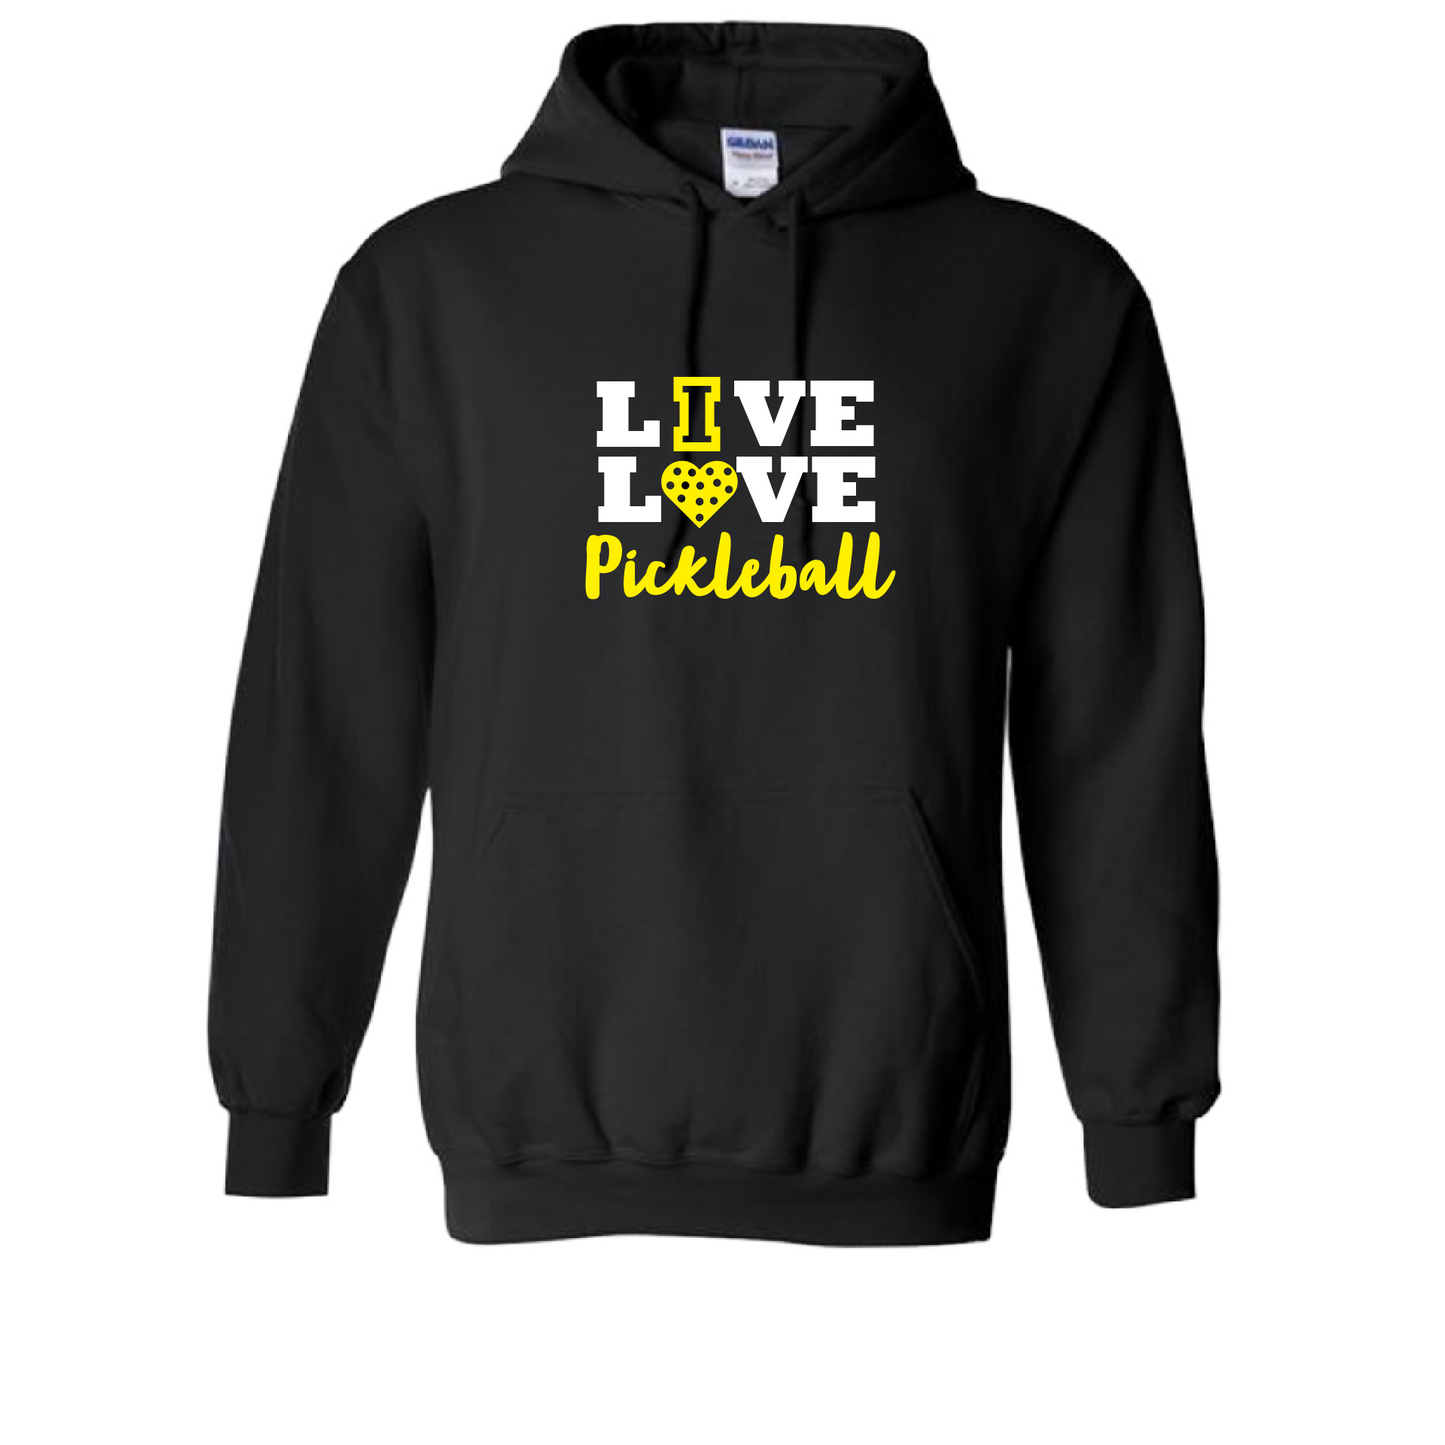 Pickleball Design: Live Love Pickleball  Unisex Hooded Sweatshirt: Moisture-wicking, double-lined hood, front pouch pocket.  This unisex hooded sweatshirt is ultra comfortable and soft. Stay warm on the Pickleball courts while being that hit with this one of kind design.